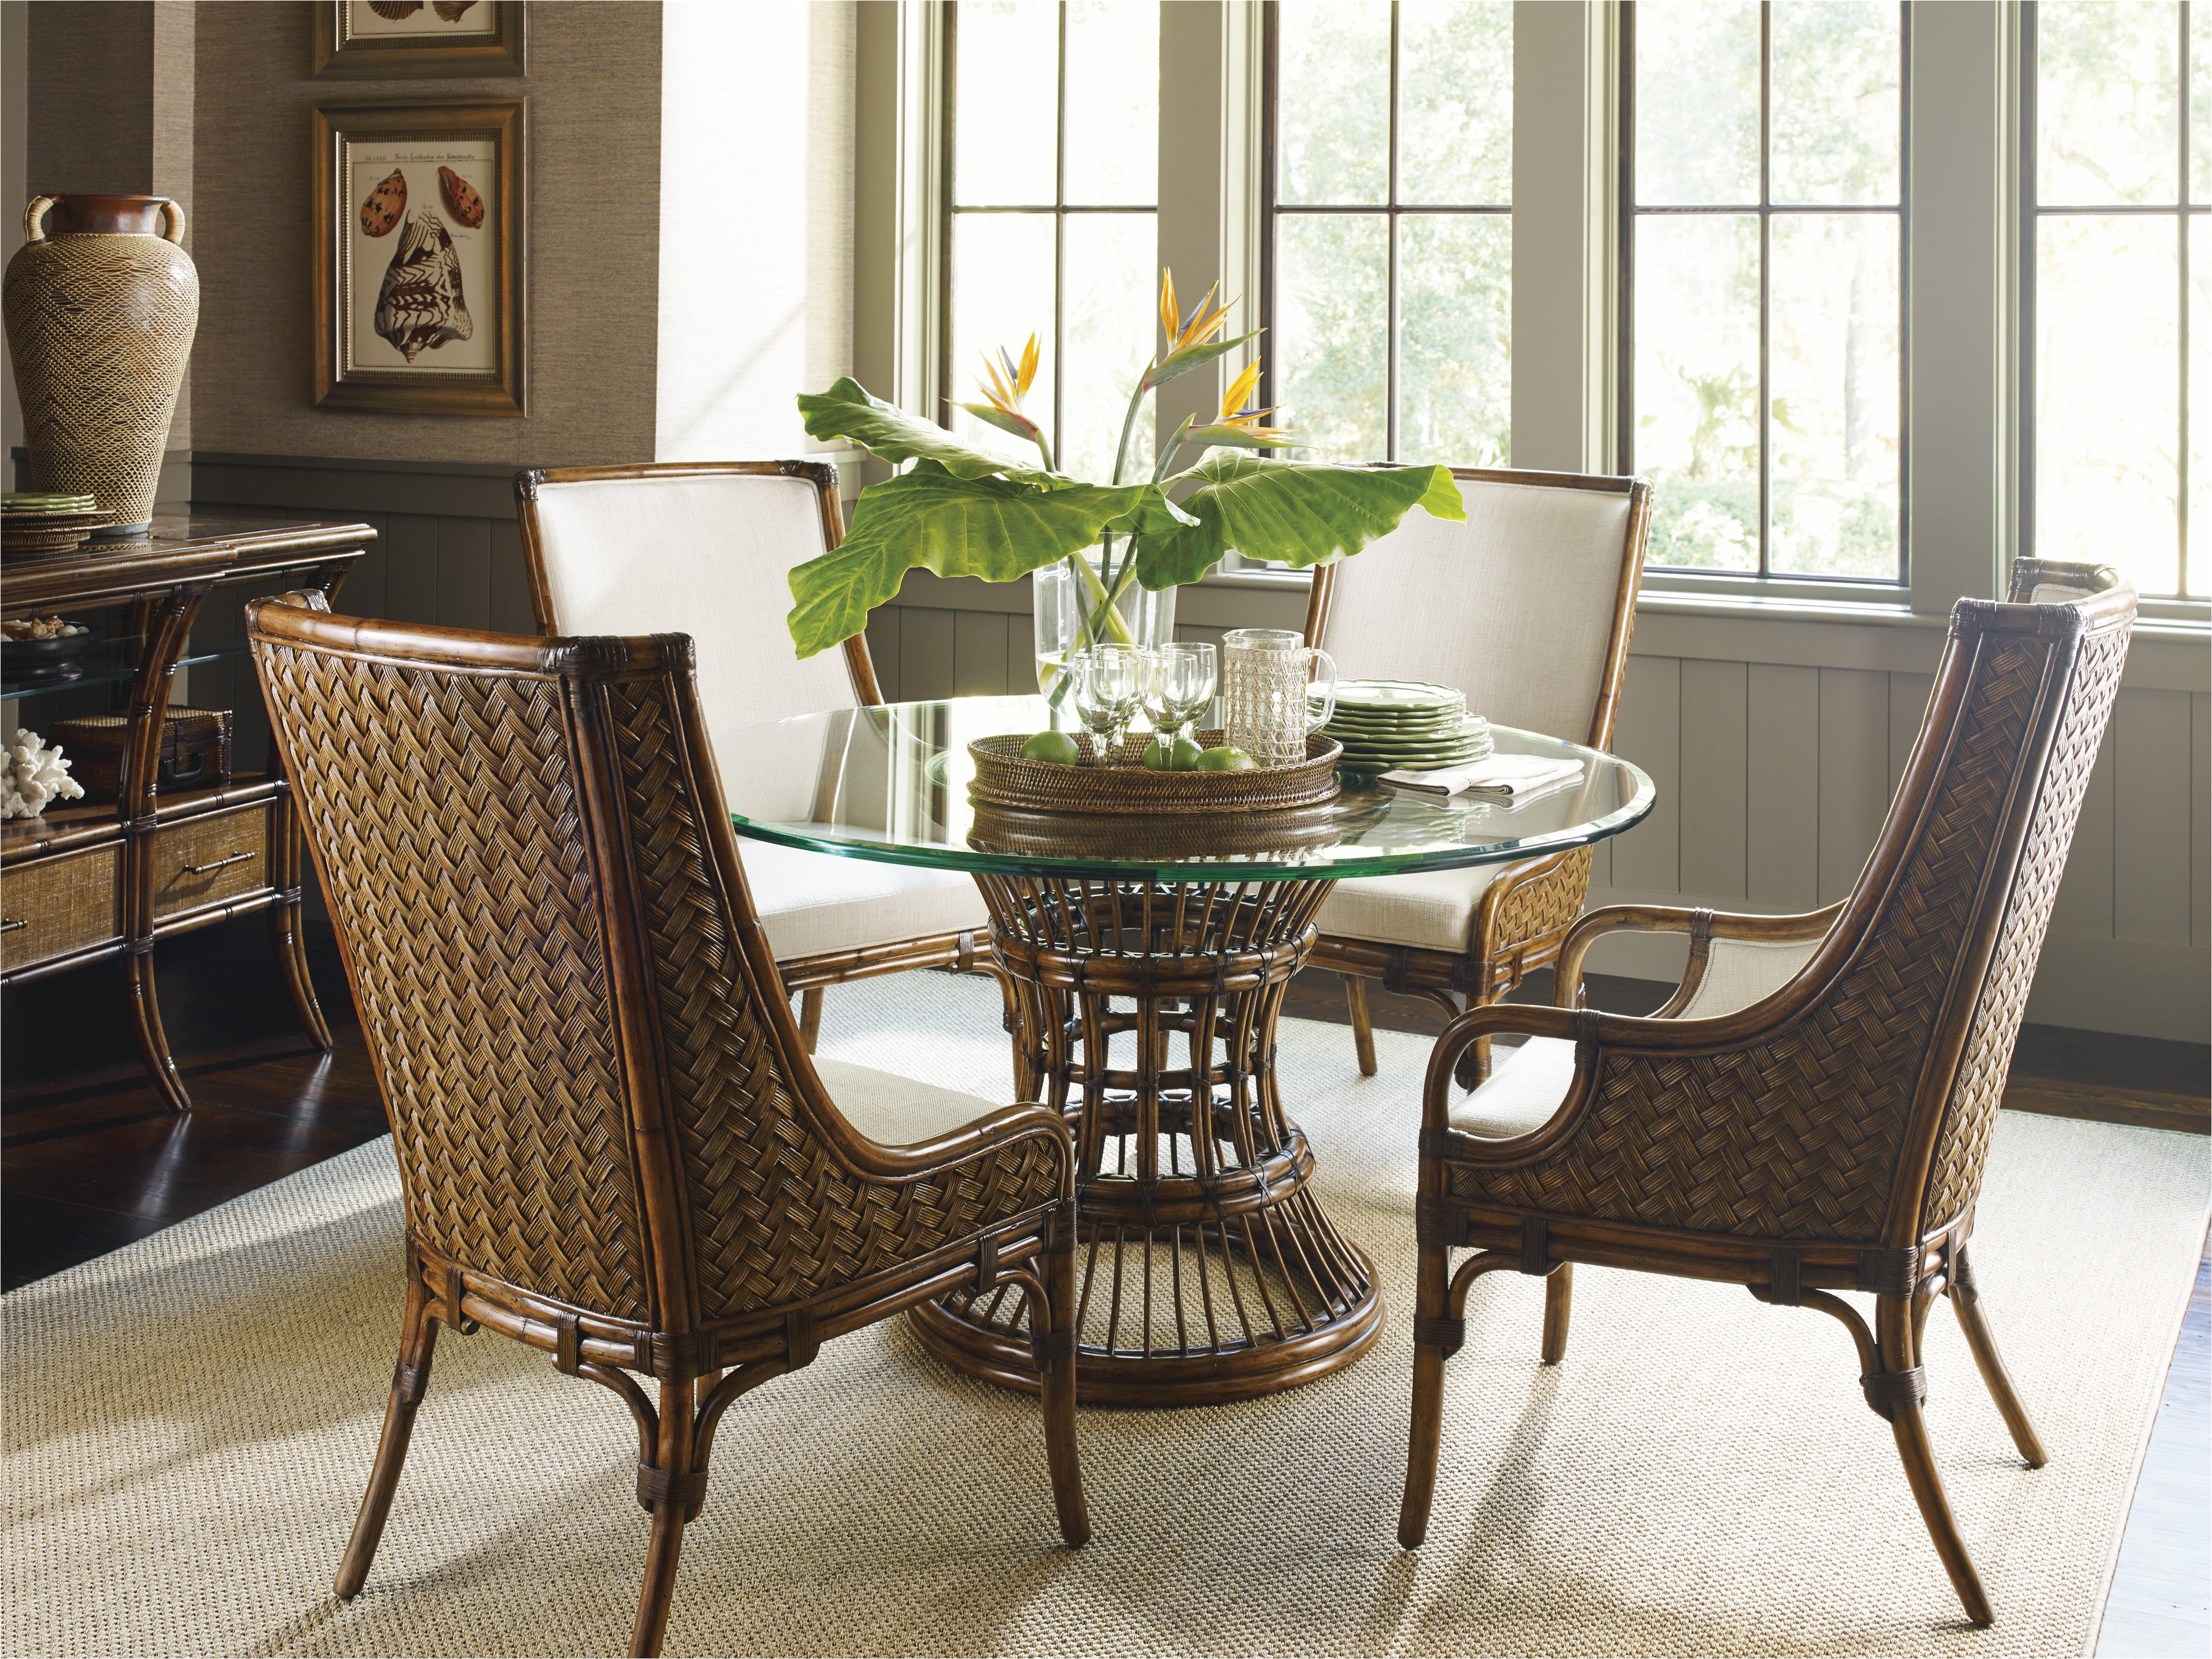 baers dining room sets